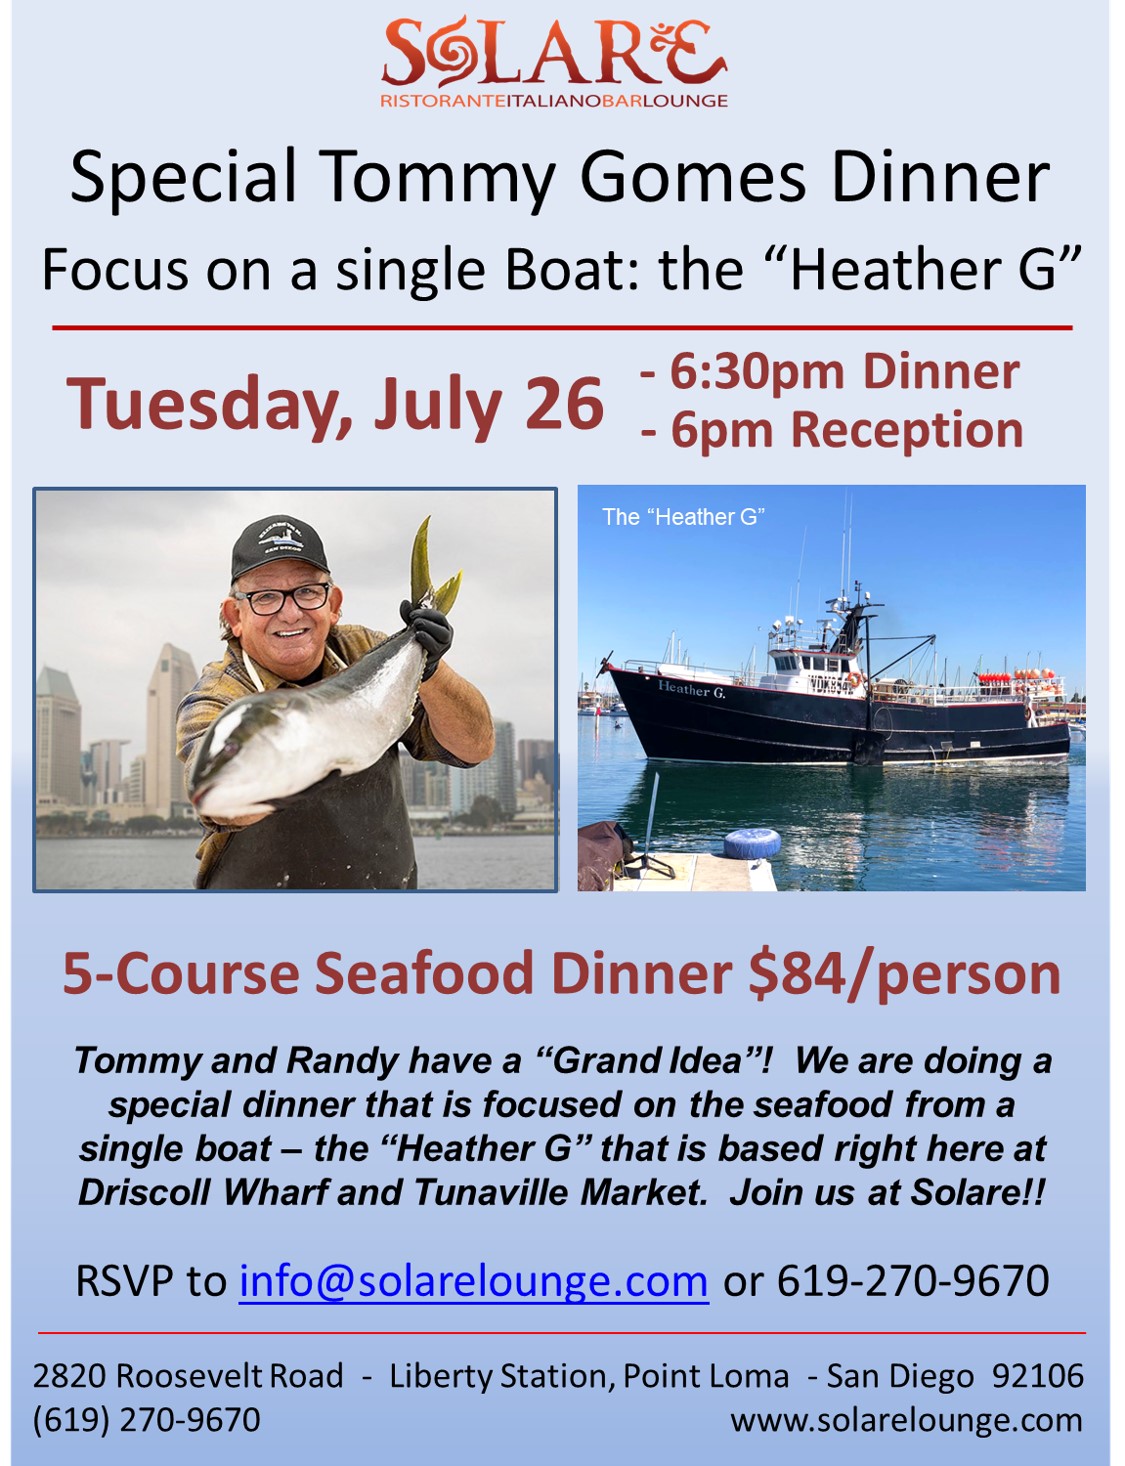 <a id="Solare-Tommy-Gomes-very-local-Seafood-Dinner"></a>Solare - Special Tommy Gomes "very local" Seafood Dinner